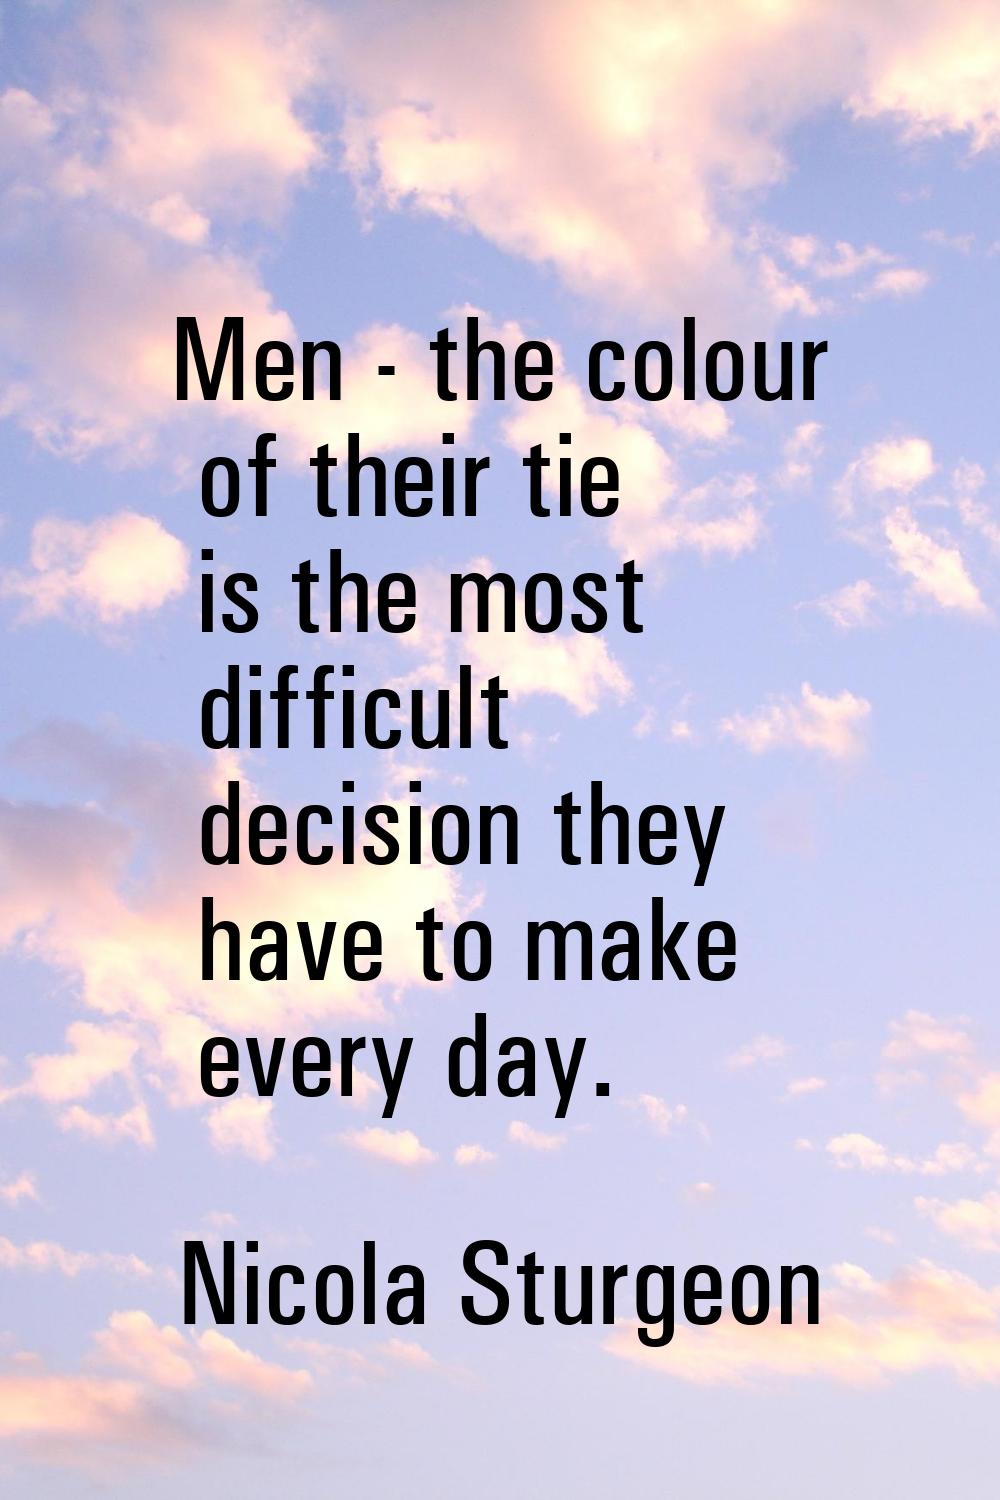 Men - the colour of their tie is the most difficult decision they have to make every day.